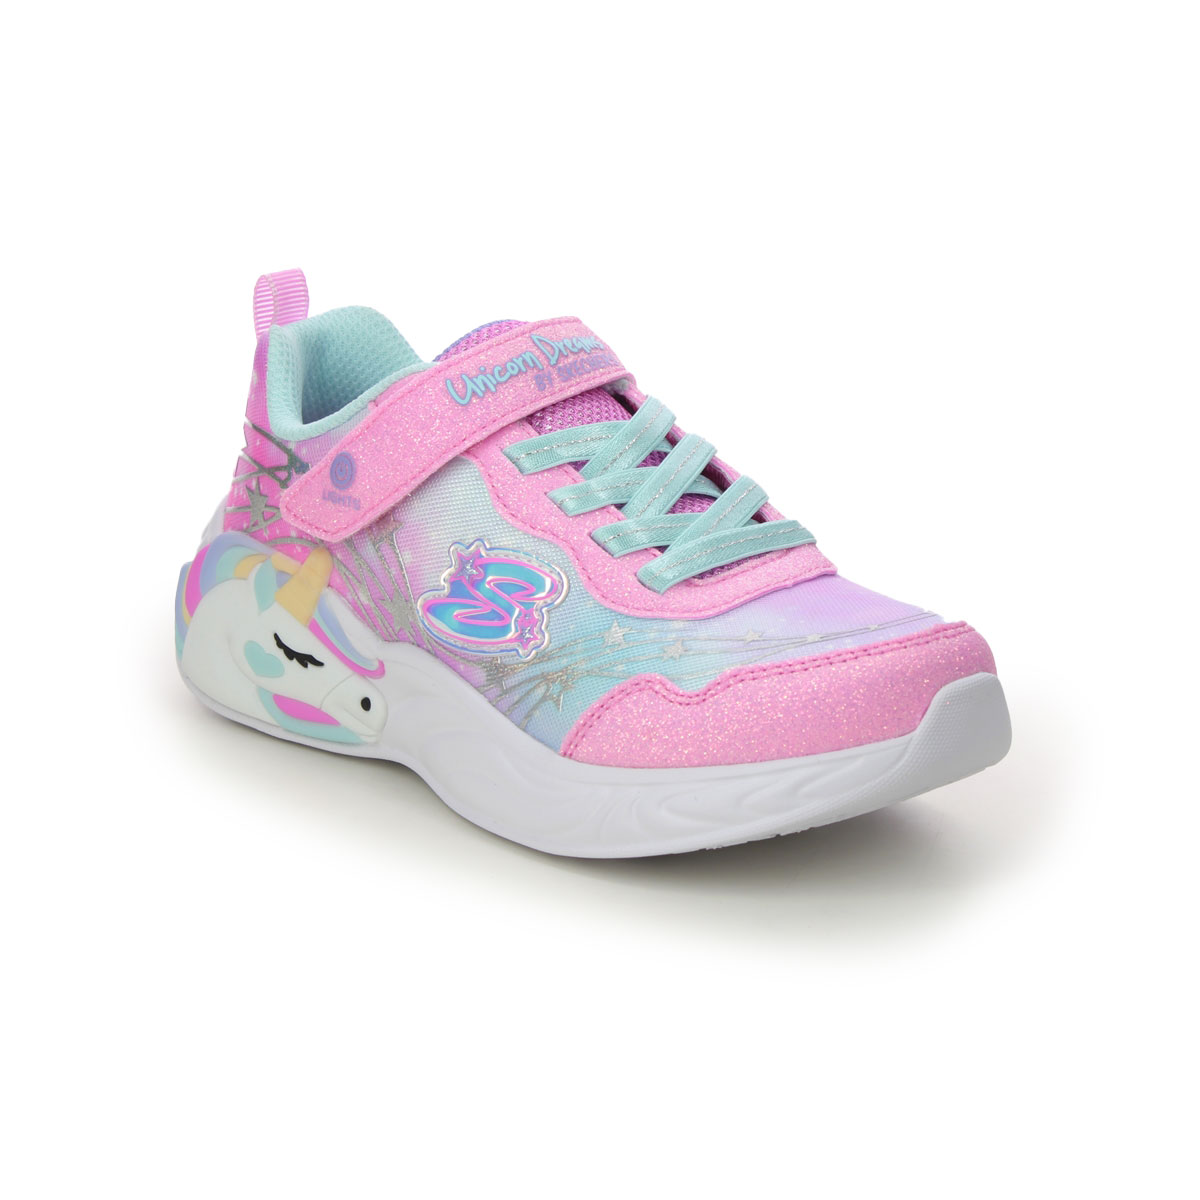 Skechers Unicorn Dreams PKTQ Pink Turquoise Kids girls trainers 302299L in a Plain Textile in Size 32